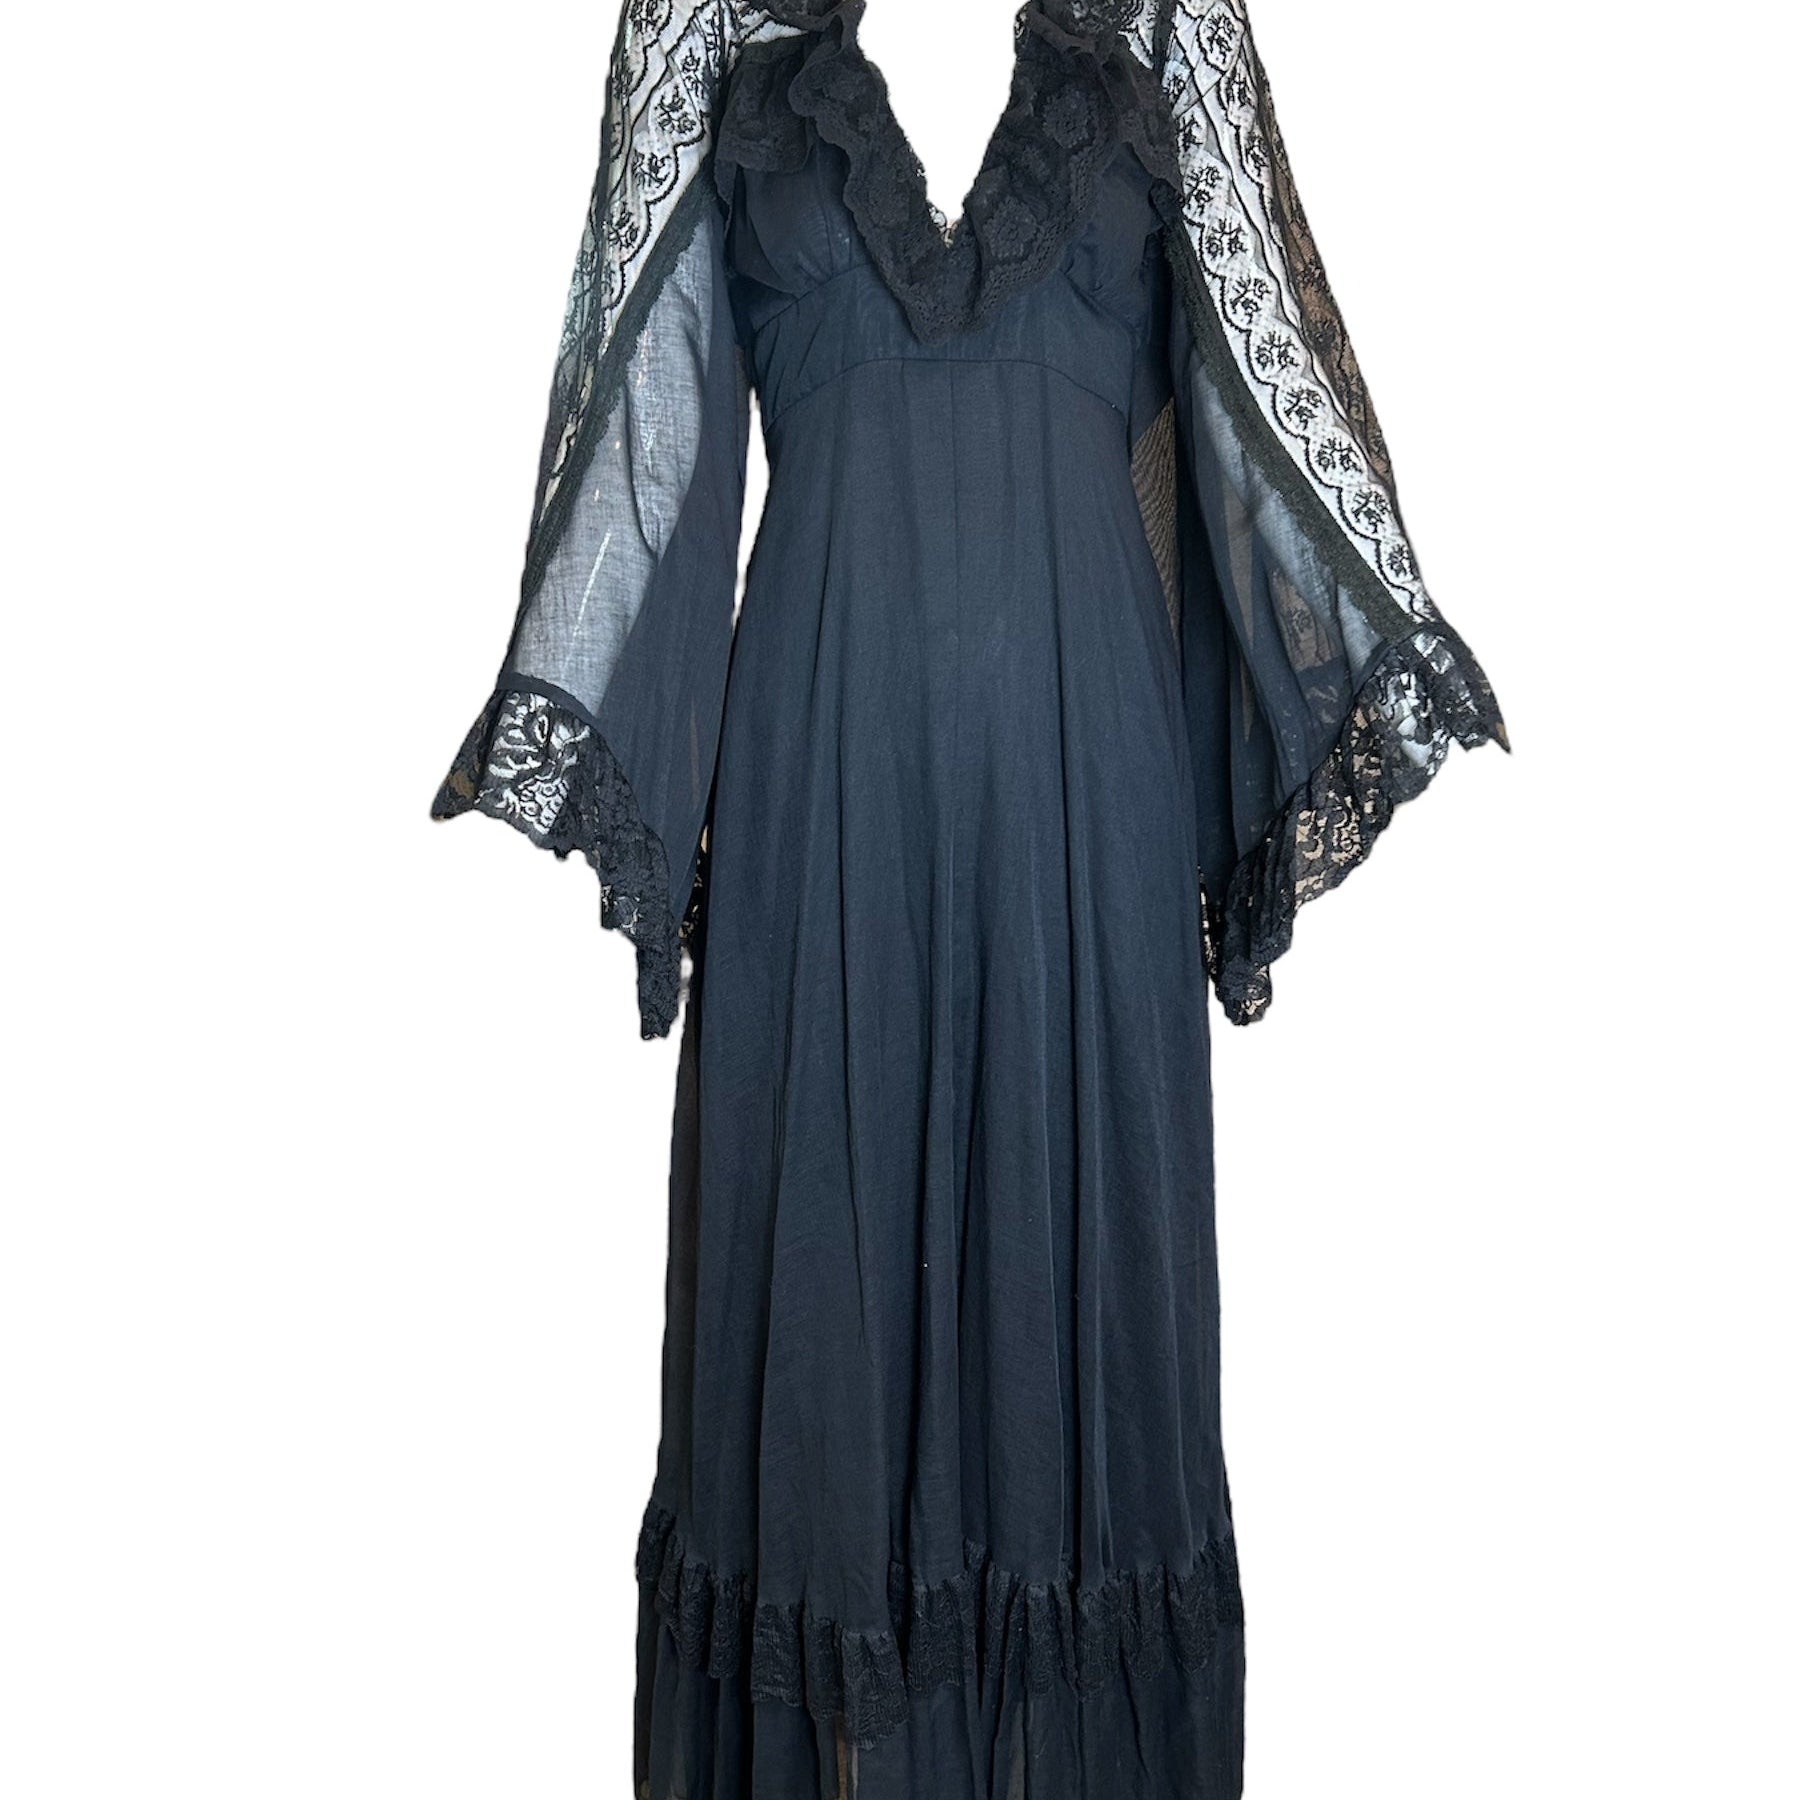 Gunne Sax Black Label Witchy Black Lace Gown with Angel Sleeves FRONT PHOTO 1 OF 5